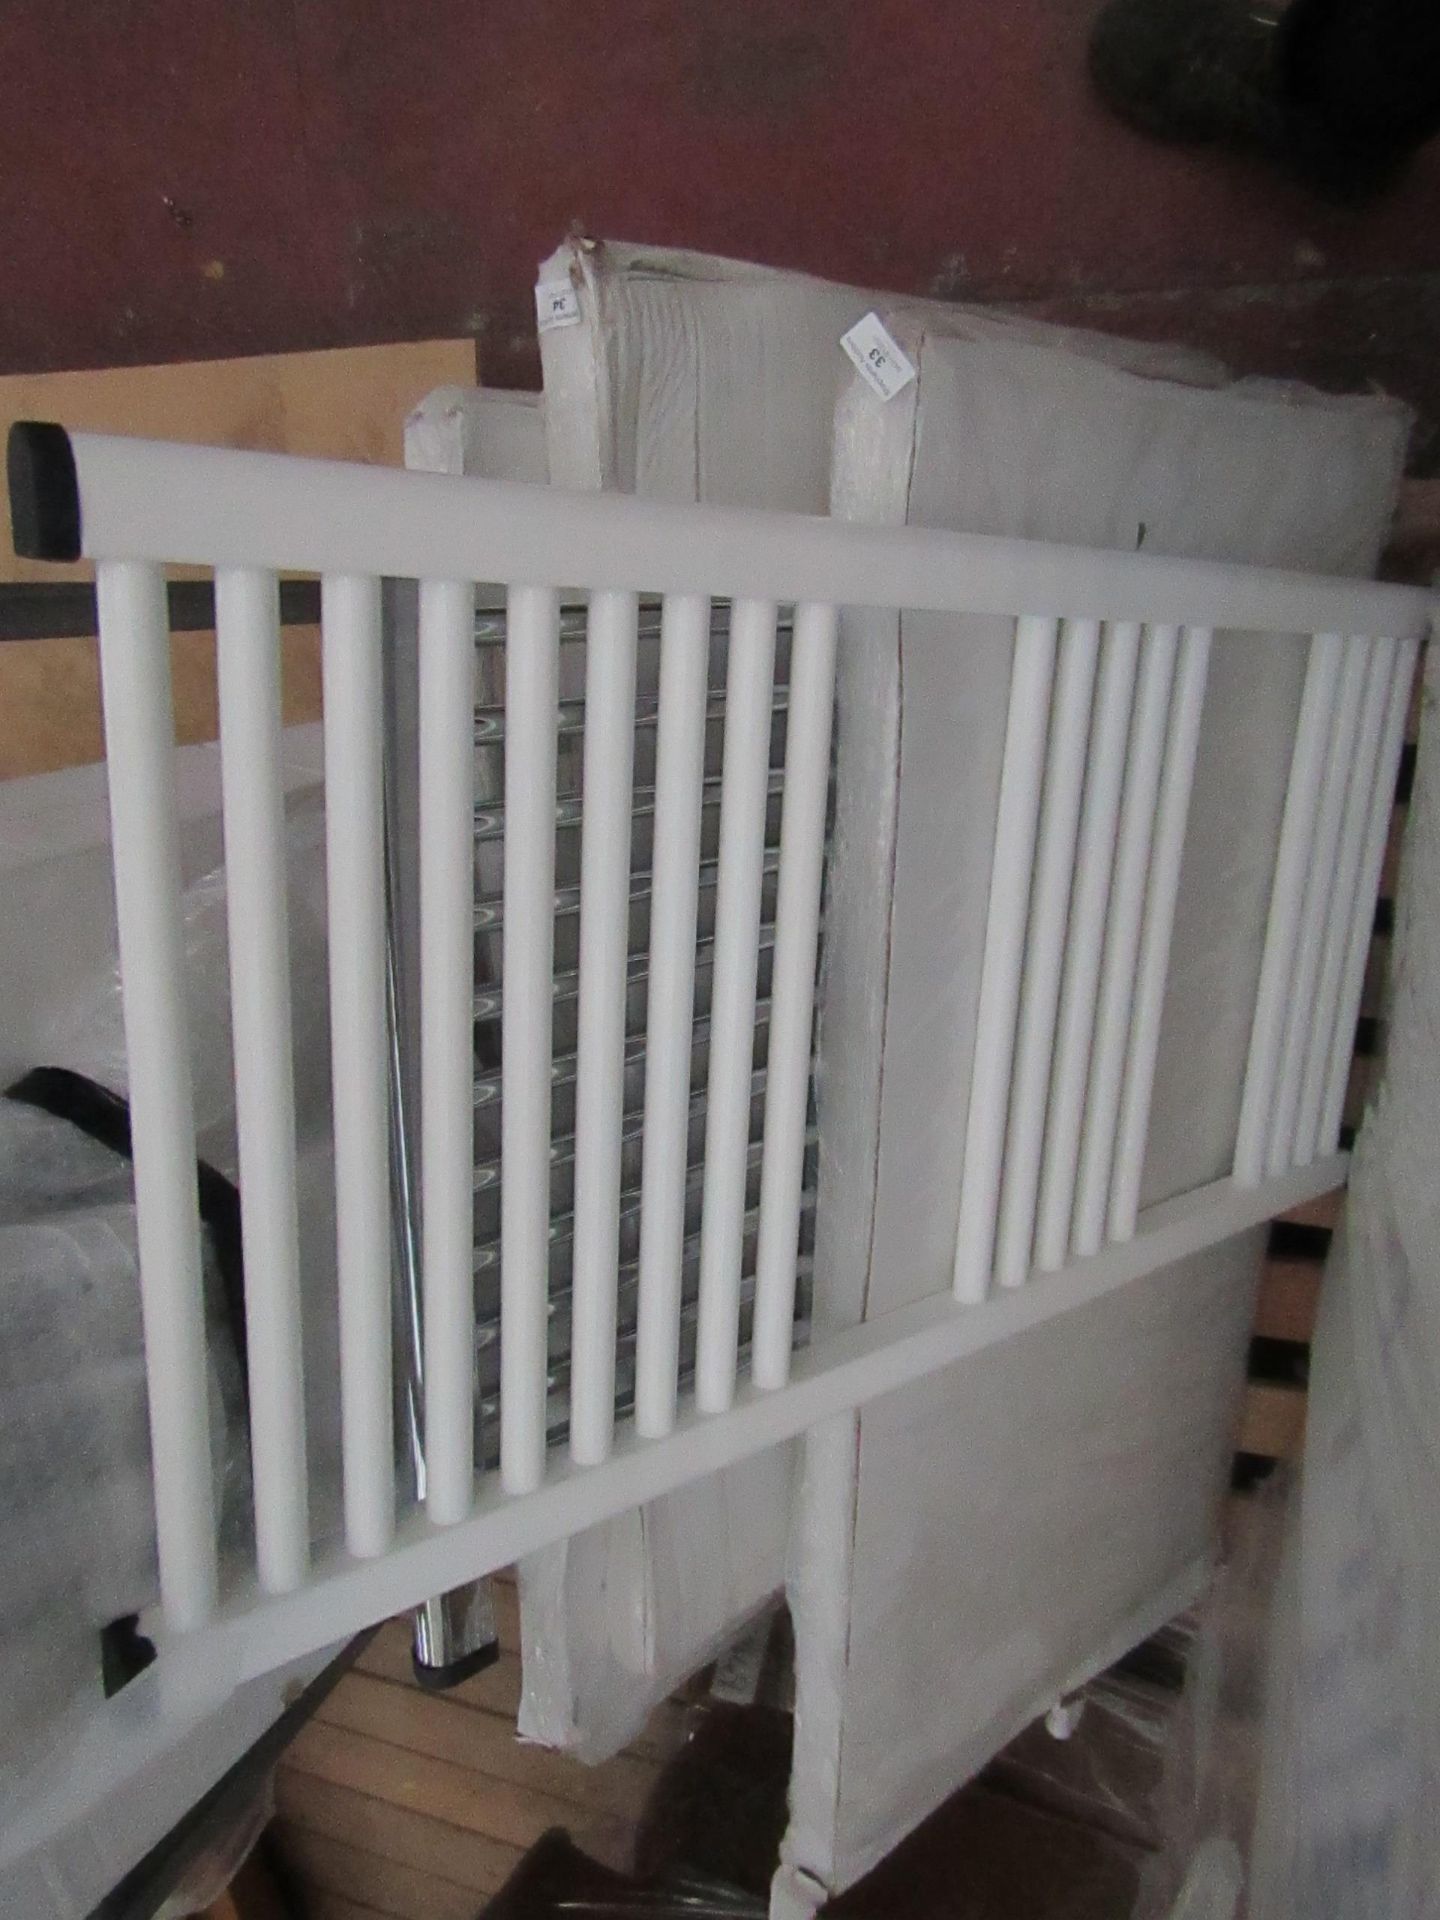 Loco straight towel radiator 800 x 800, ex-display and boxed. Please note, this lot may contain